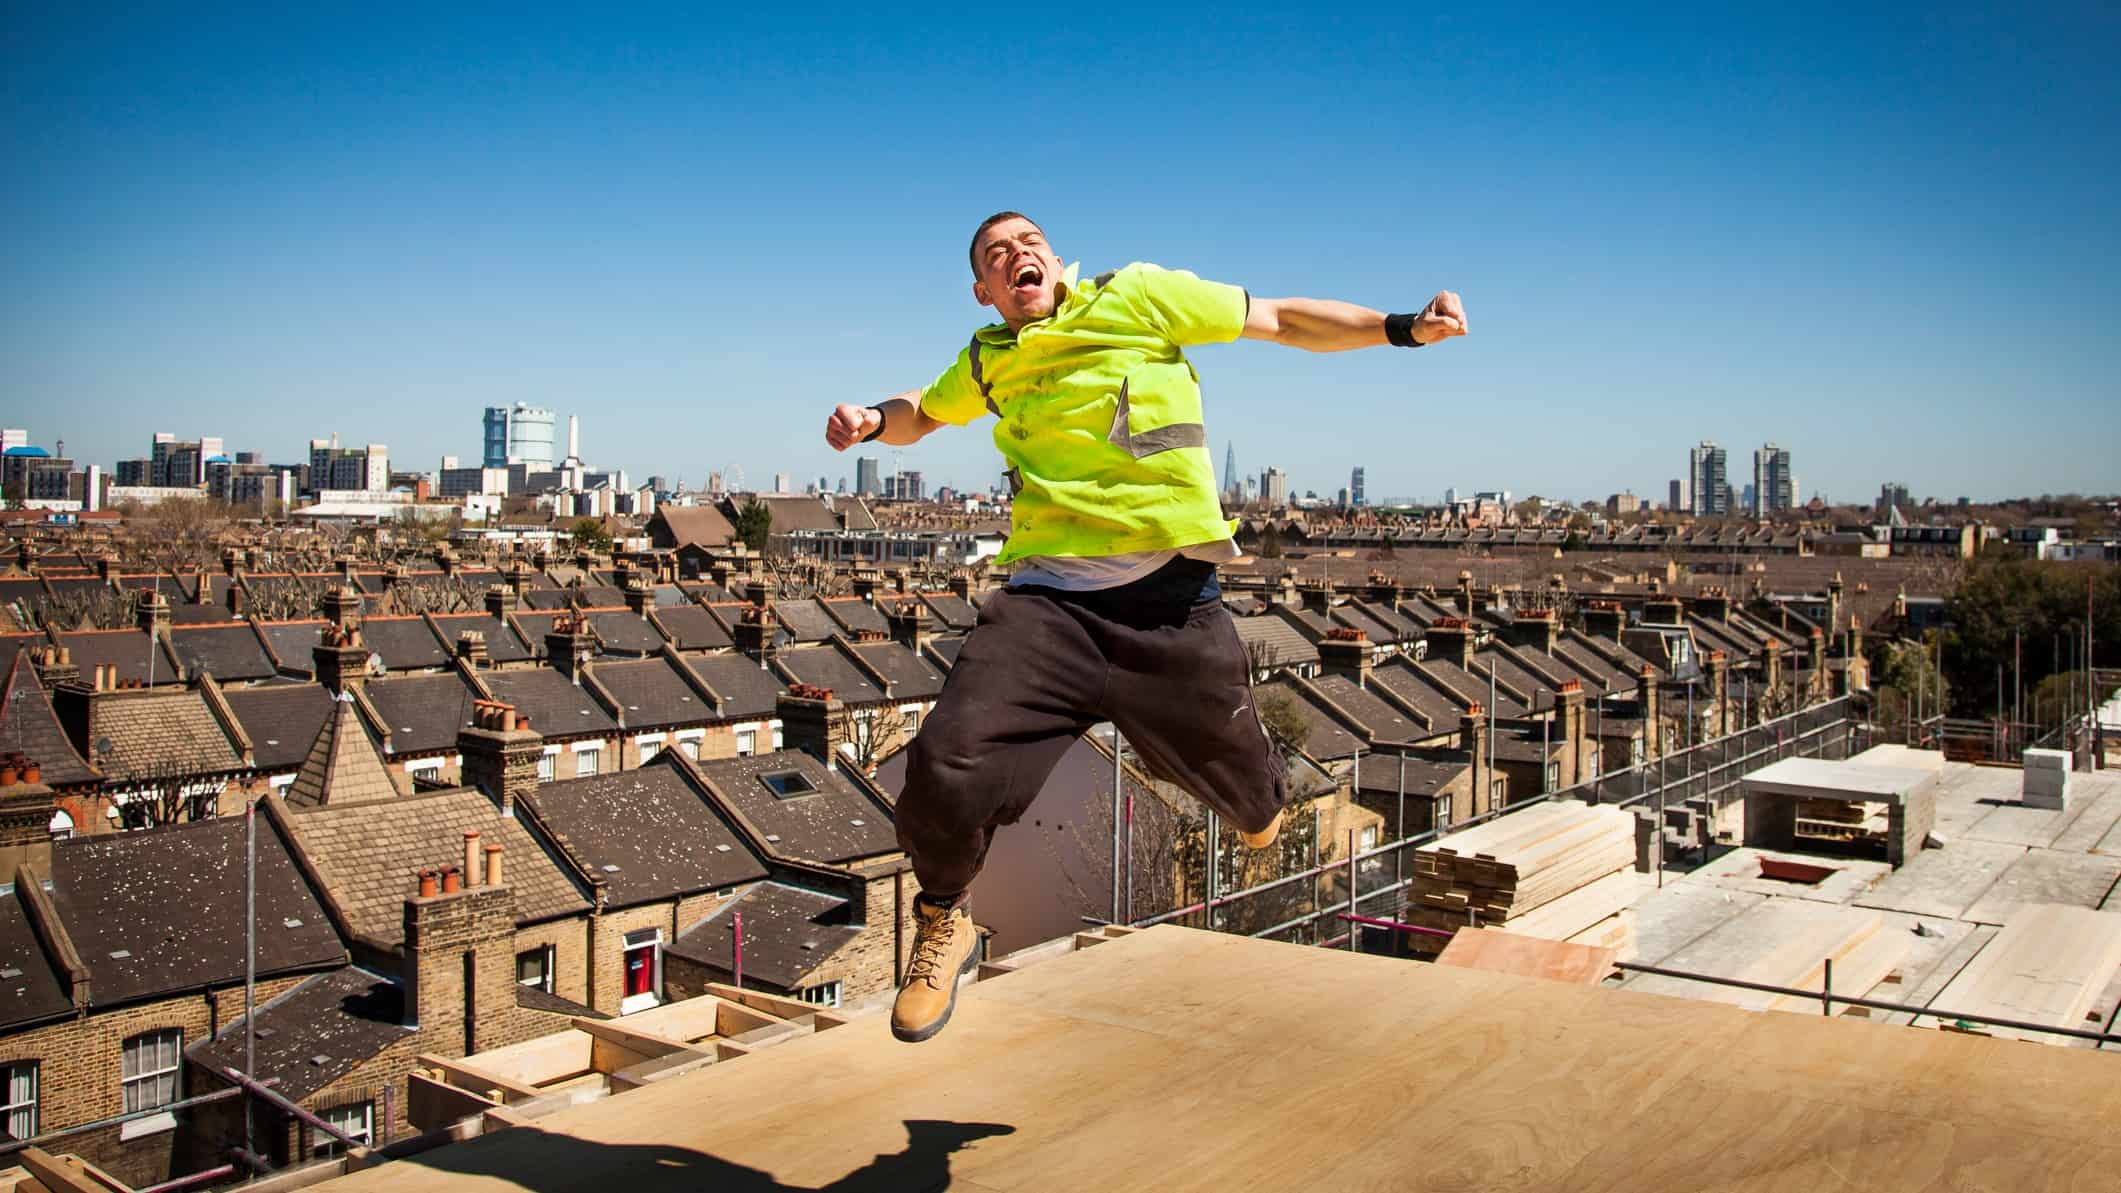 A Cimic construction worker leaps high in the air on a building site.